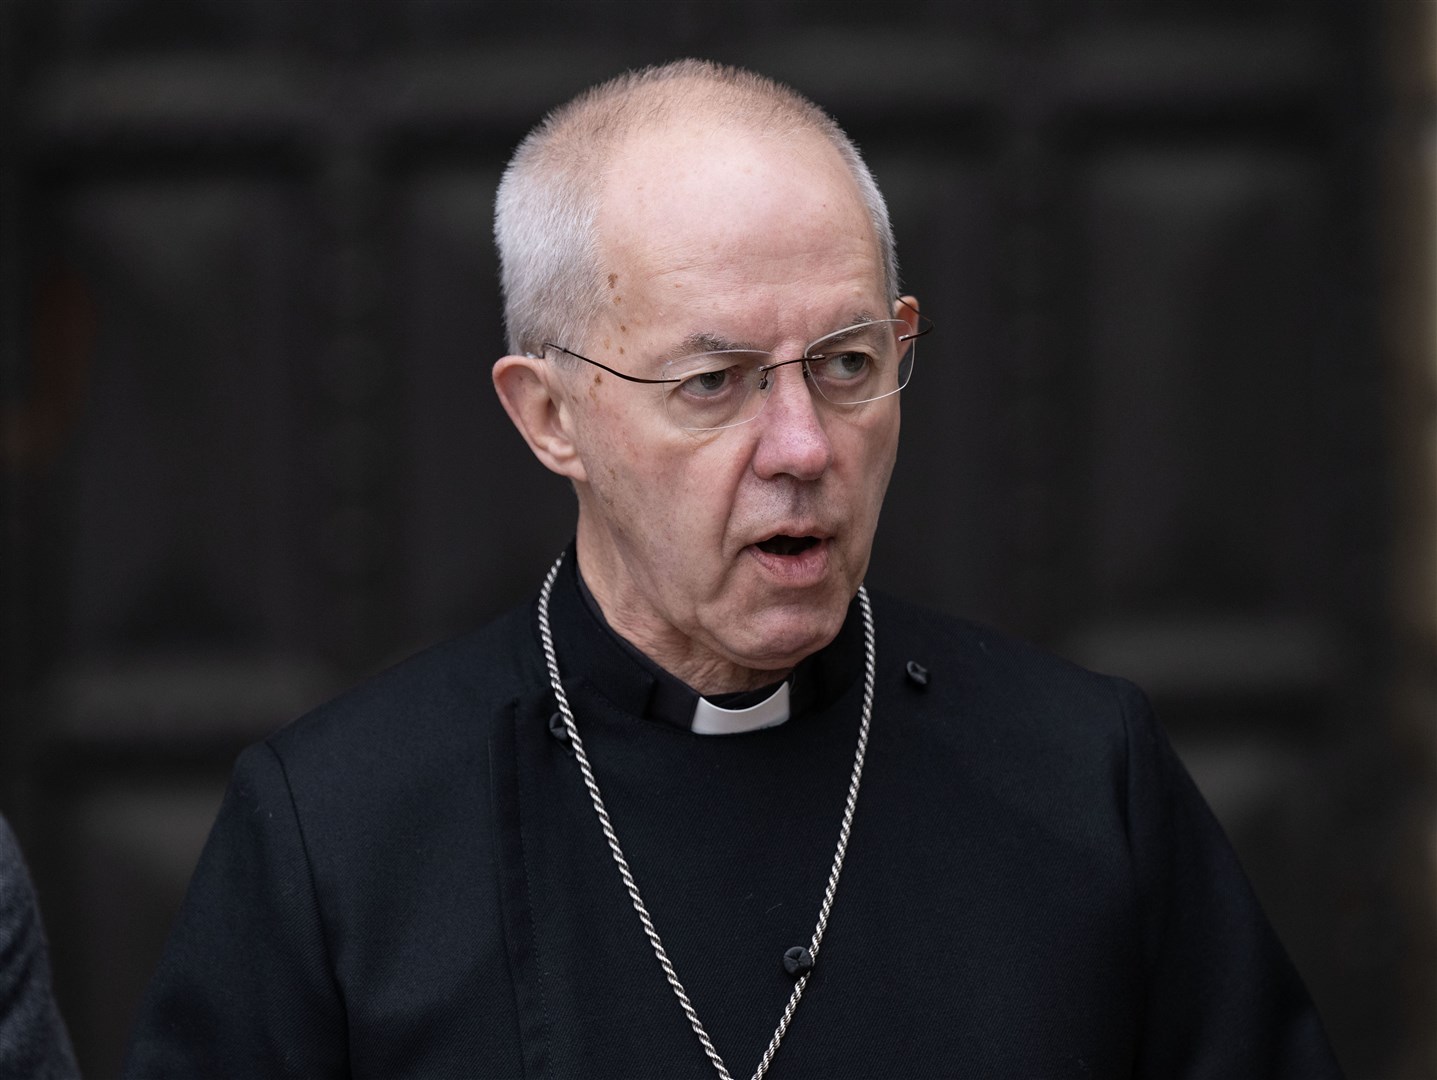 Archbishop of Canterbury Justin Welby has ‘joyfully’ welcomed the blessings proposals but will not personally carry them out (Doug Peters/PA)